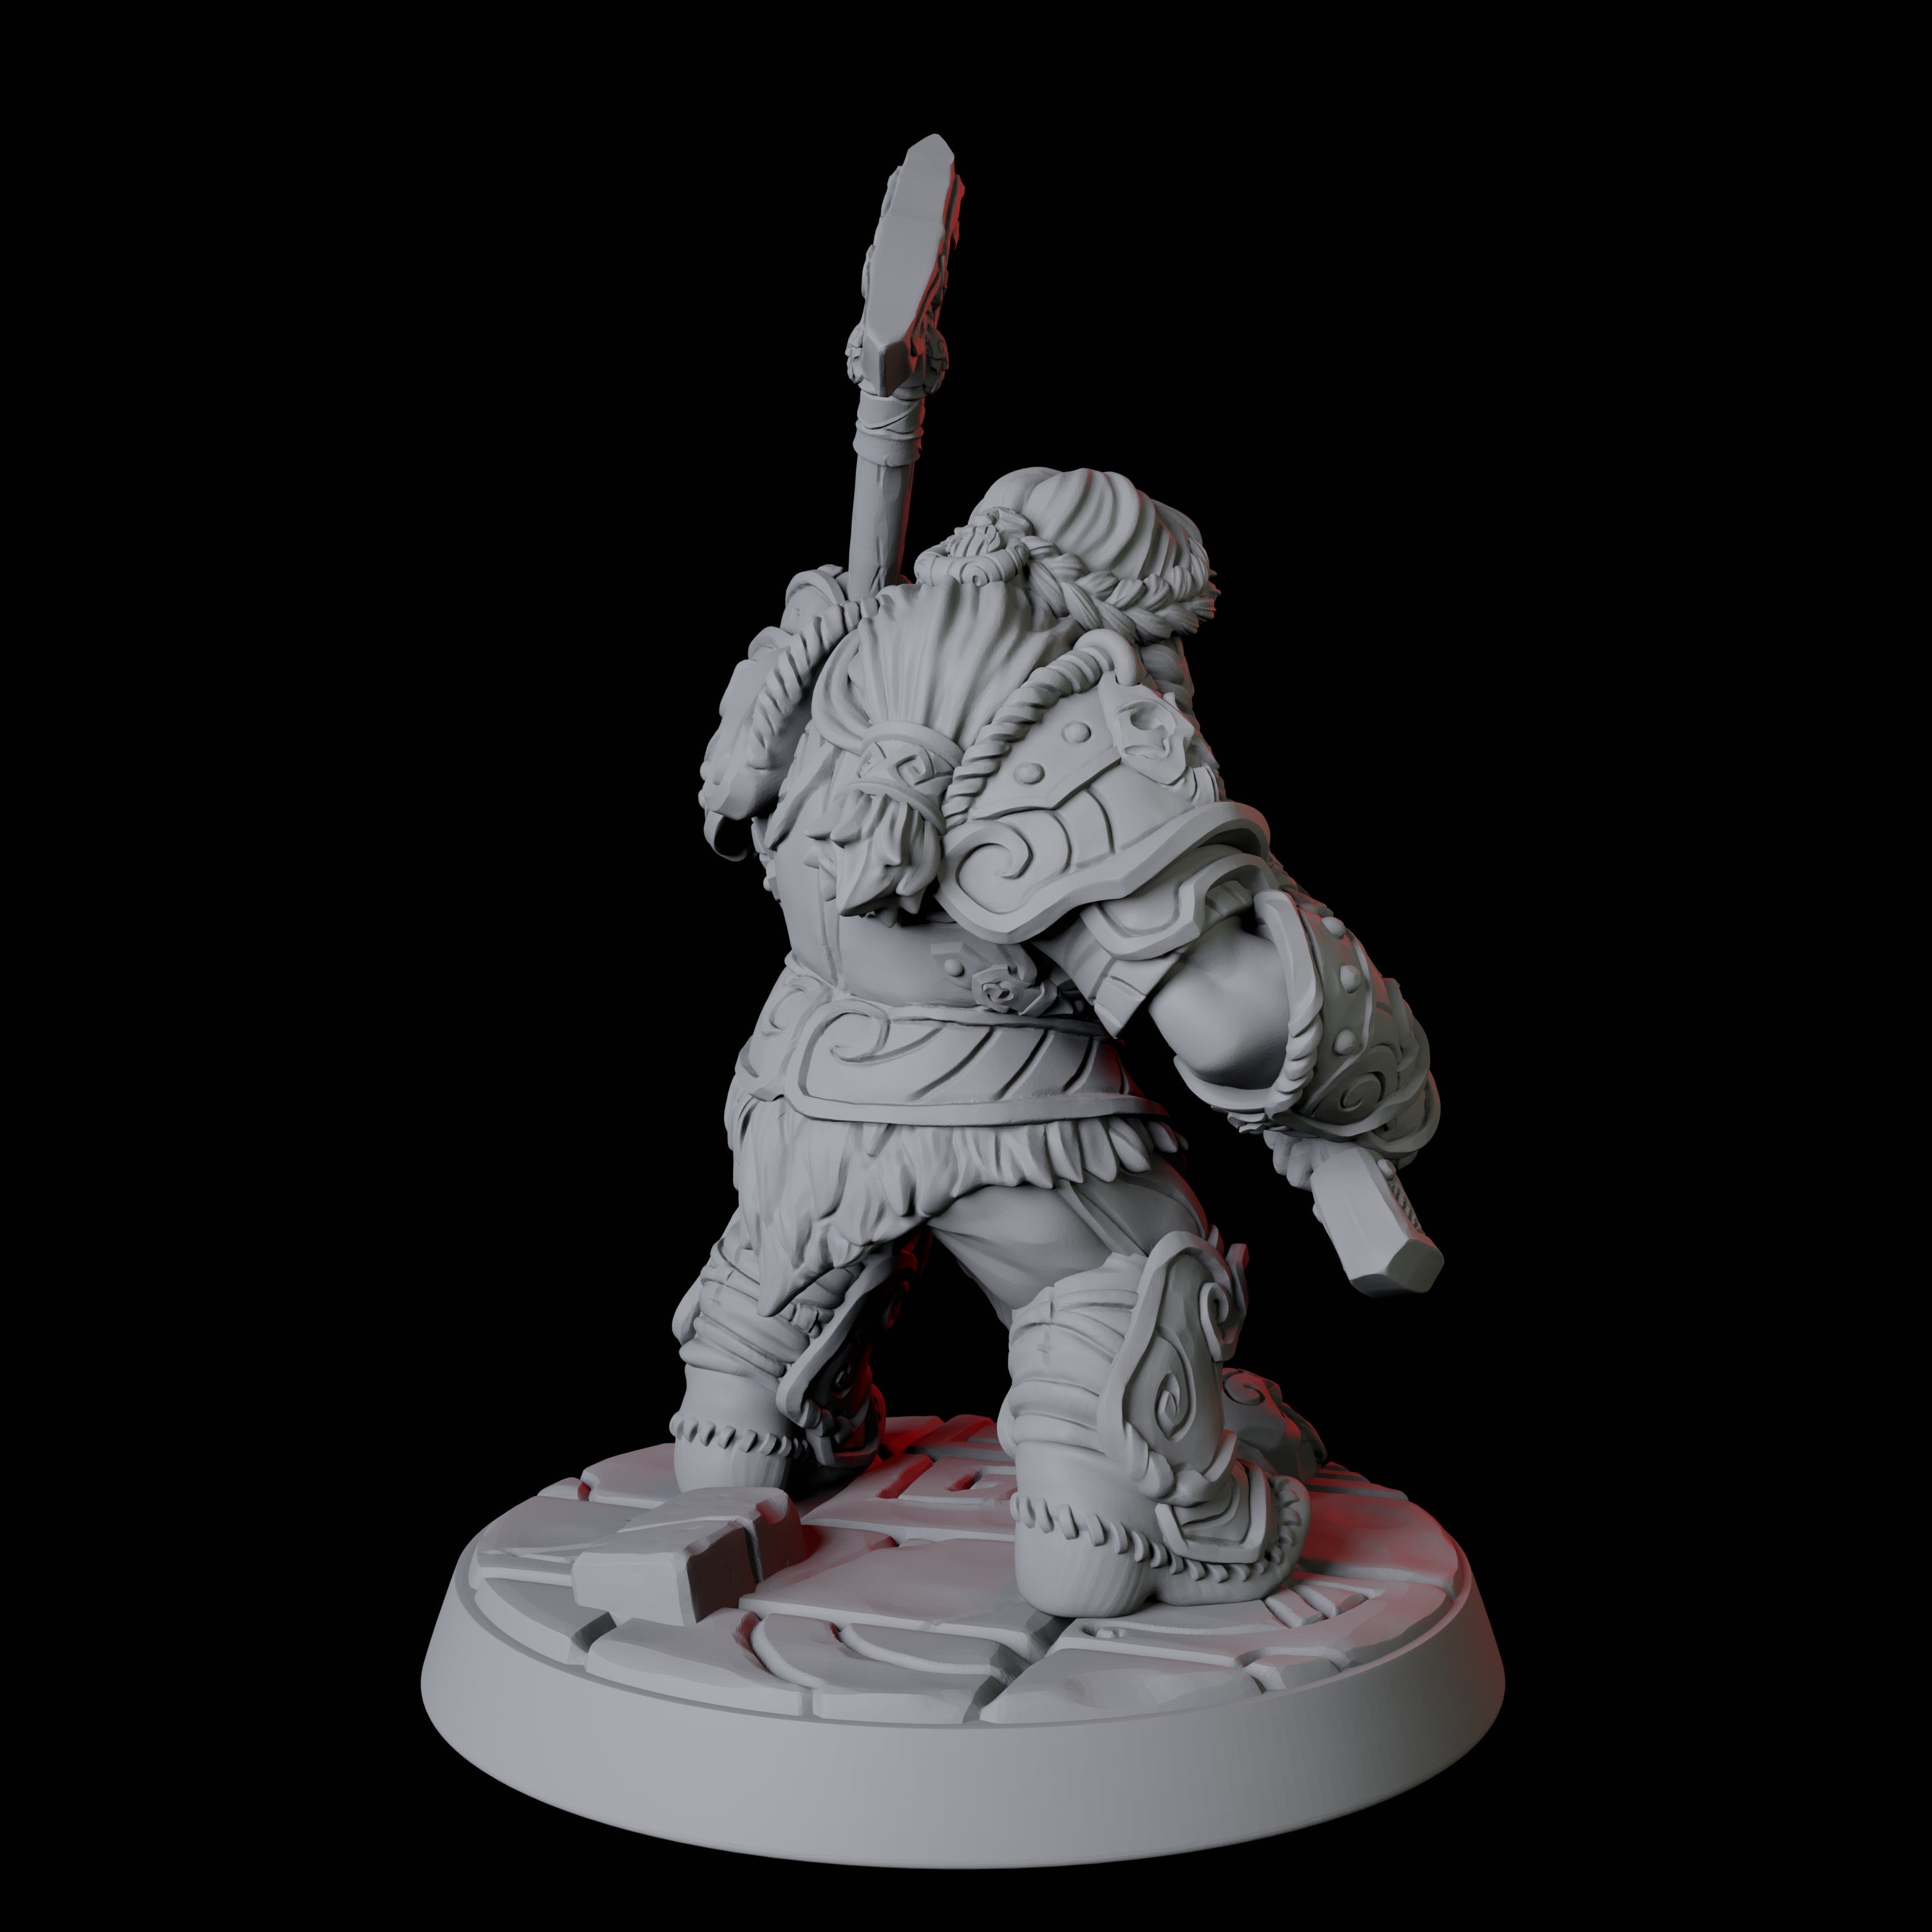 City Guard Dwarf D Miniature for Dungeons and Dragons, Pathfinder or other TTRPGs